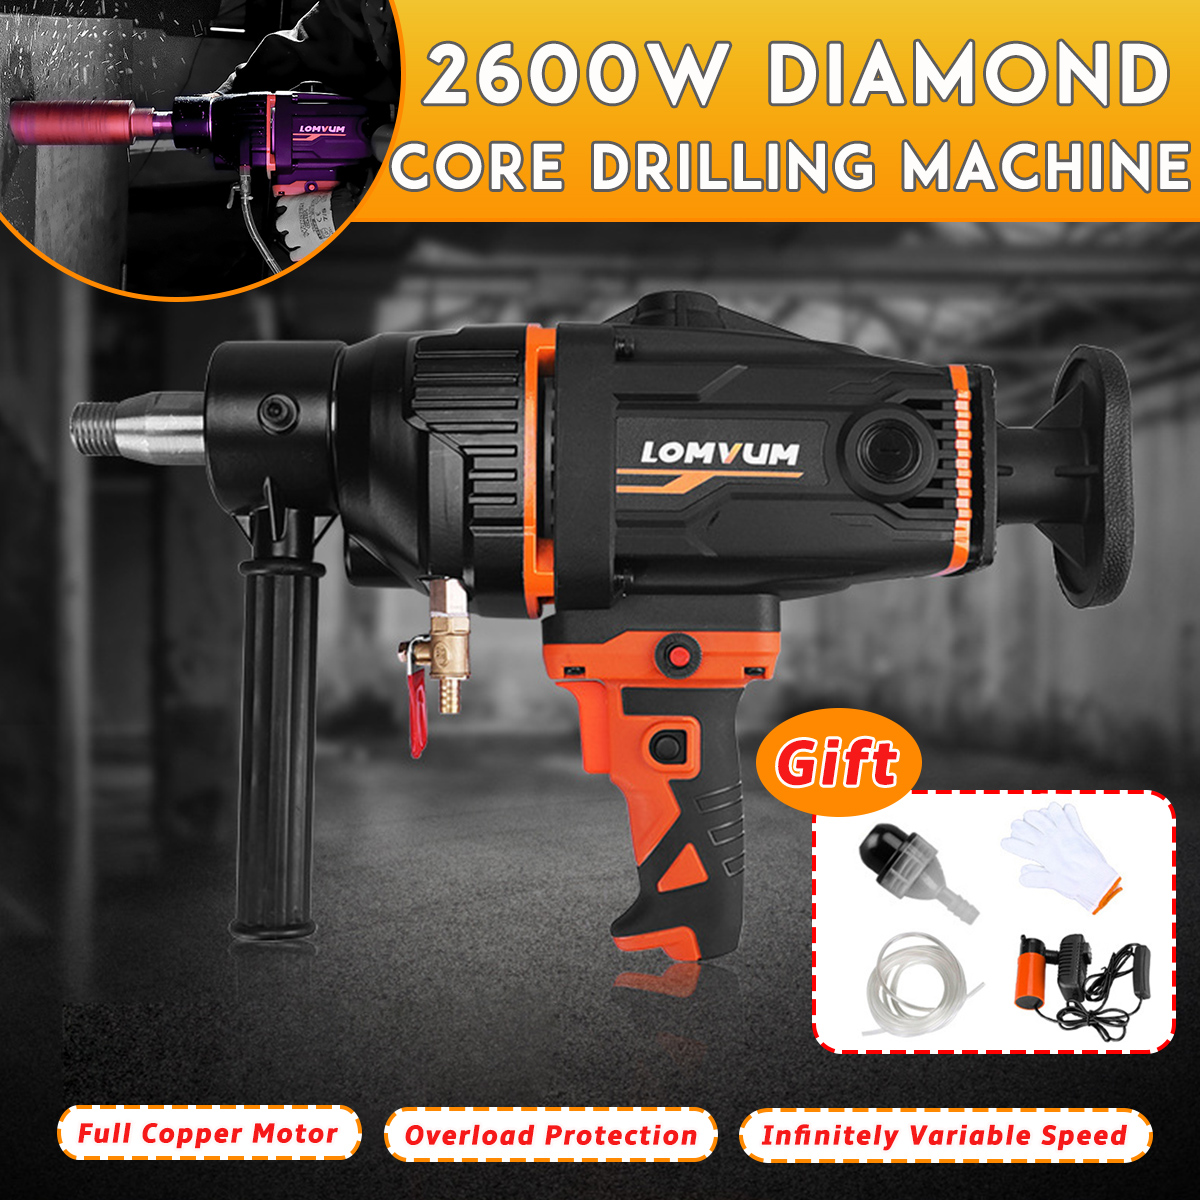 2600W-220V-1800-rpm-Diamond-Core-Hole-Puncher--Drilling-Machine-Infinitely-Variable-Speed-4-Styles-1598415-9